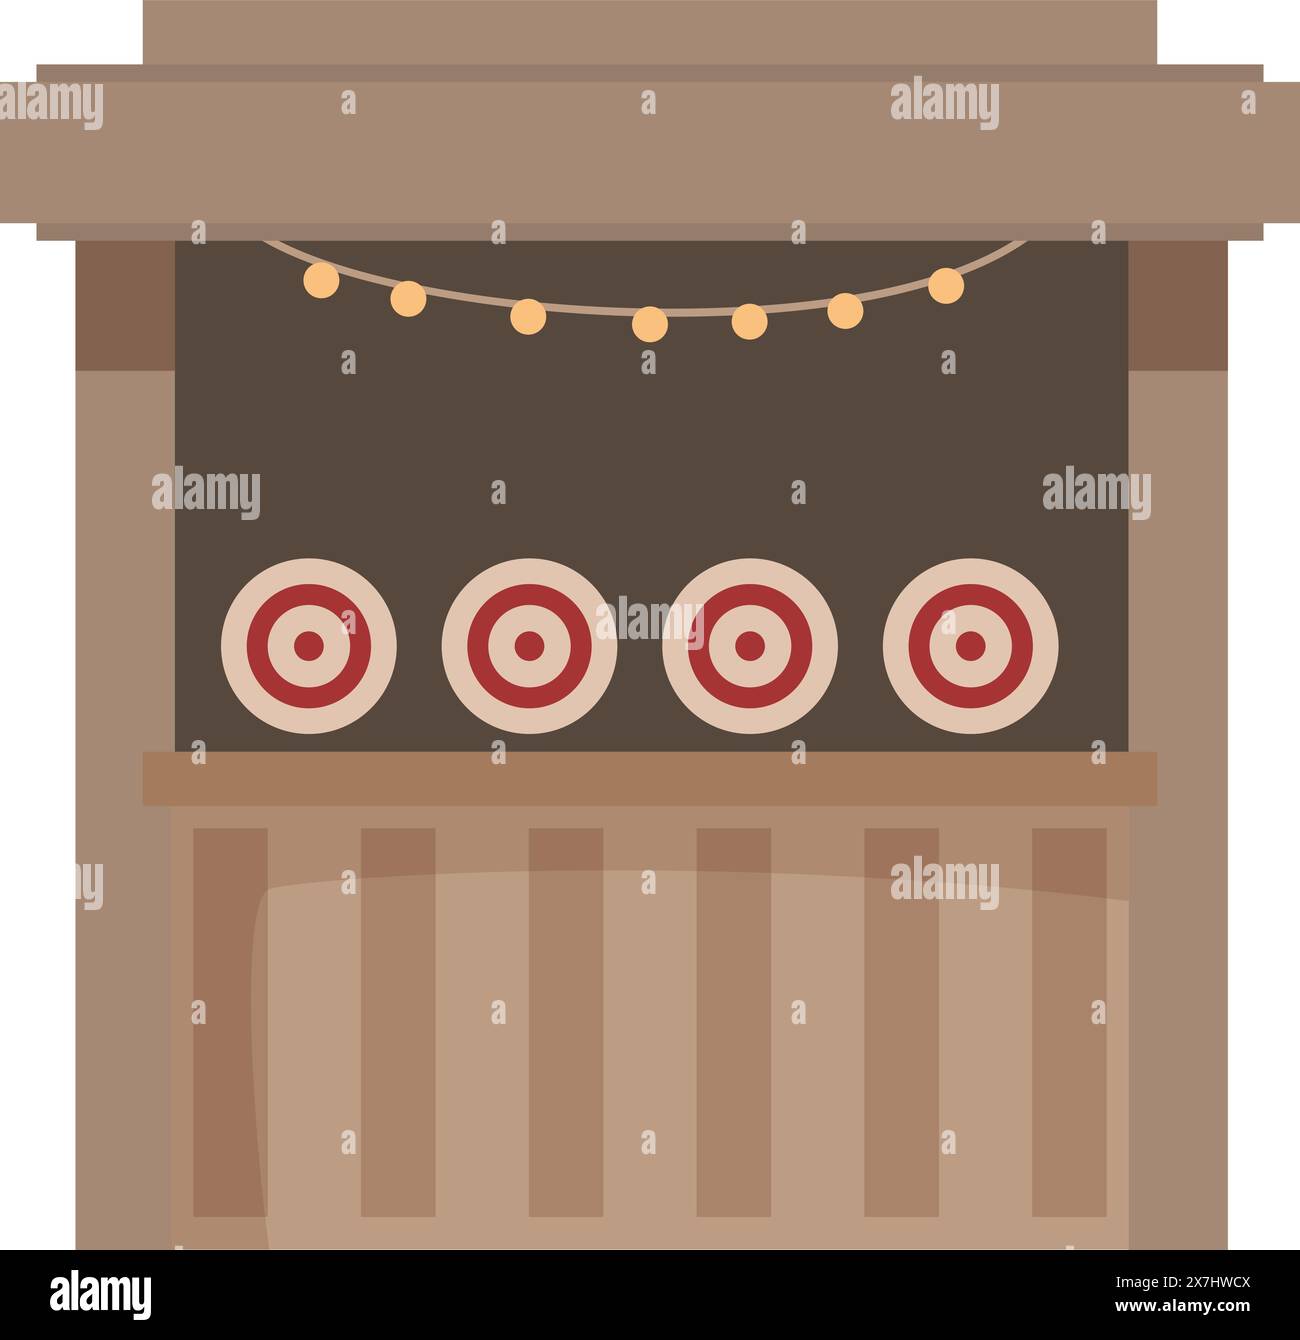 Flat vector design of a colorful shooting game stall with targets, perfect for funfair themed graphics Stock Vector